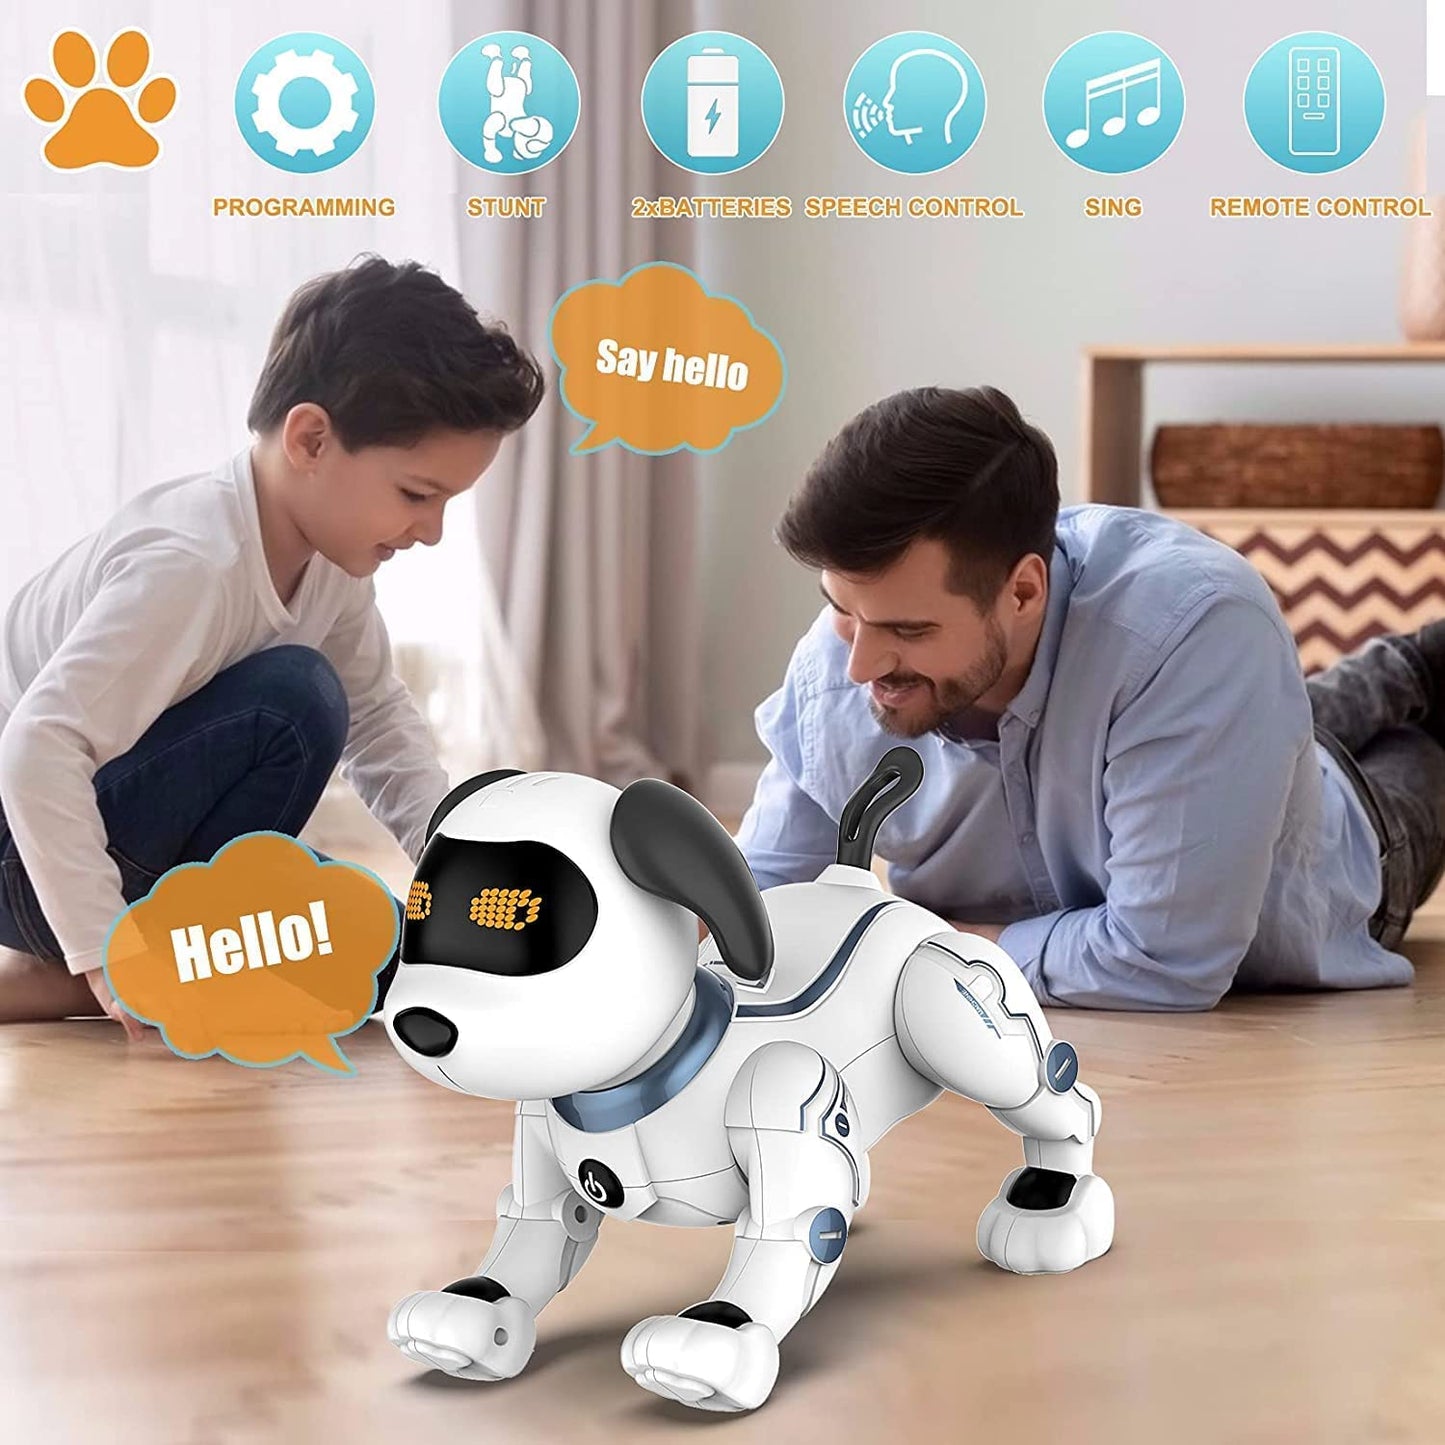 Robot Dog Toy for Kids, OKK Remote Control Robot Toy Dog and Programmable Toy Robot, Smart Dancing Walking RC Robot Puppy, Interactive Voice Control Toys, Electronic Pets Gift for Kids Boys Girls